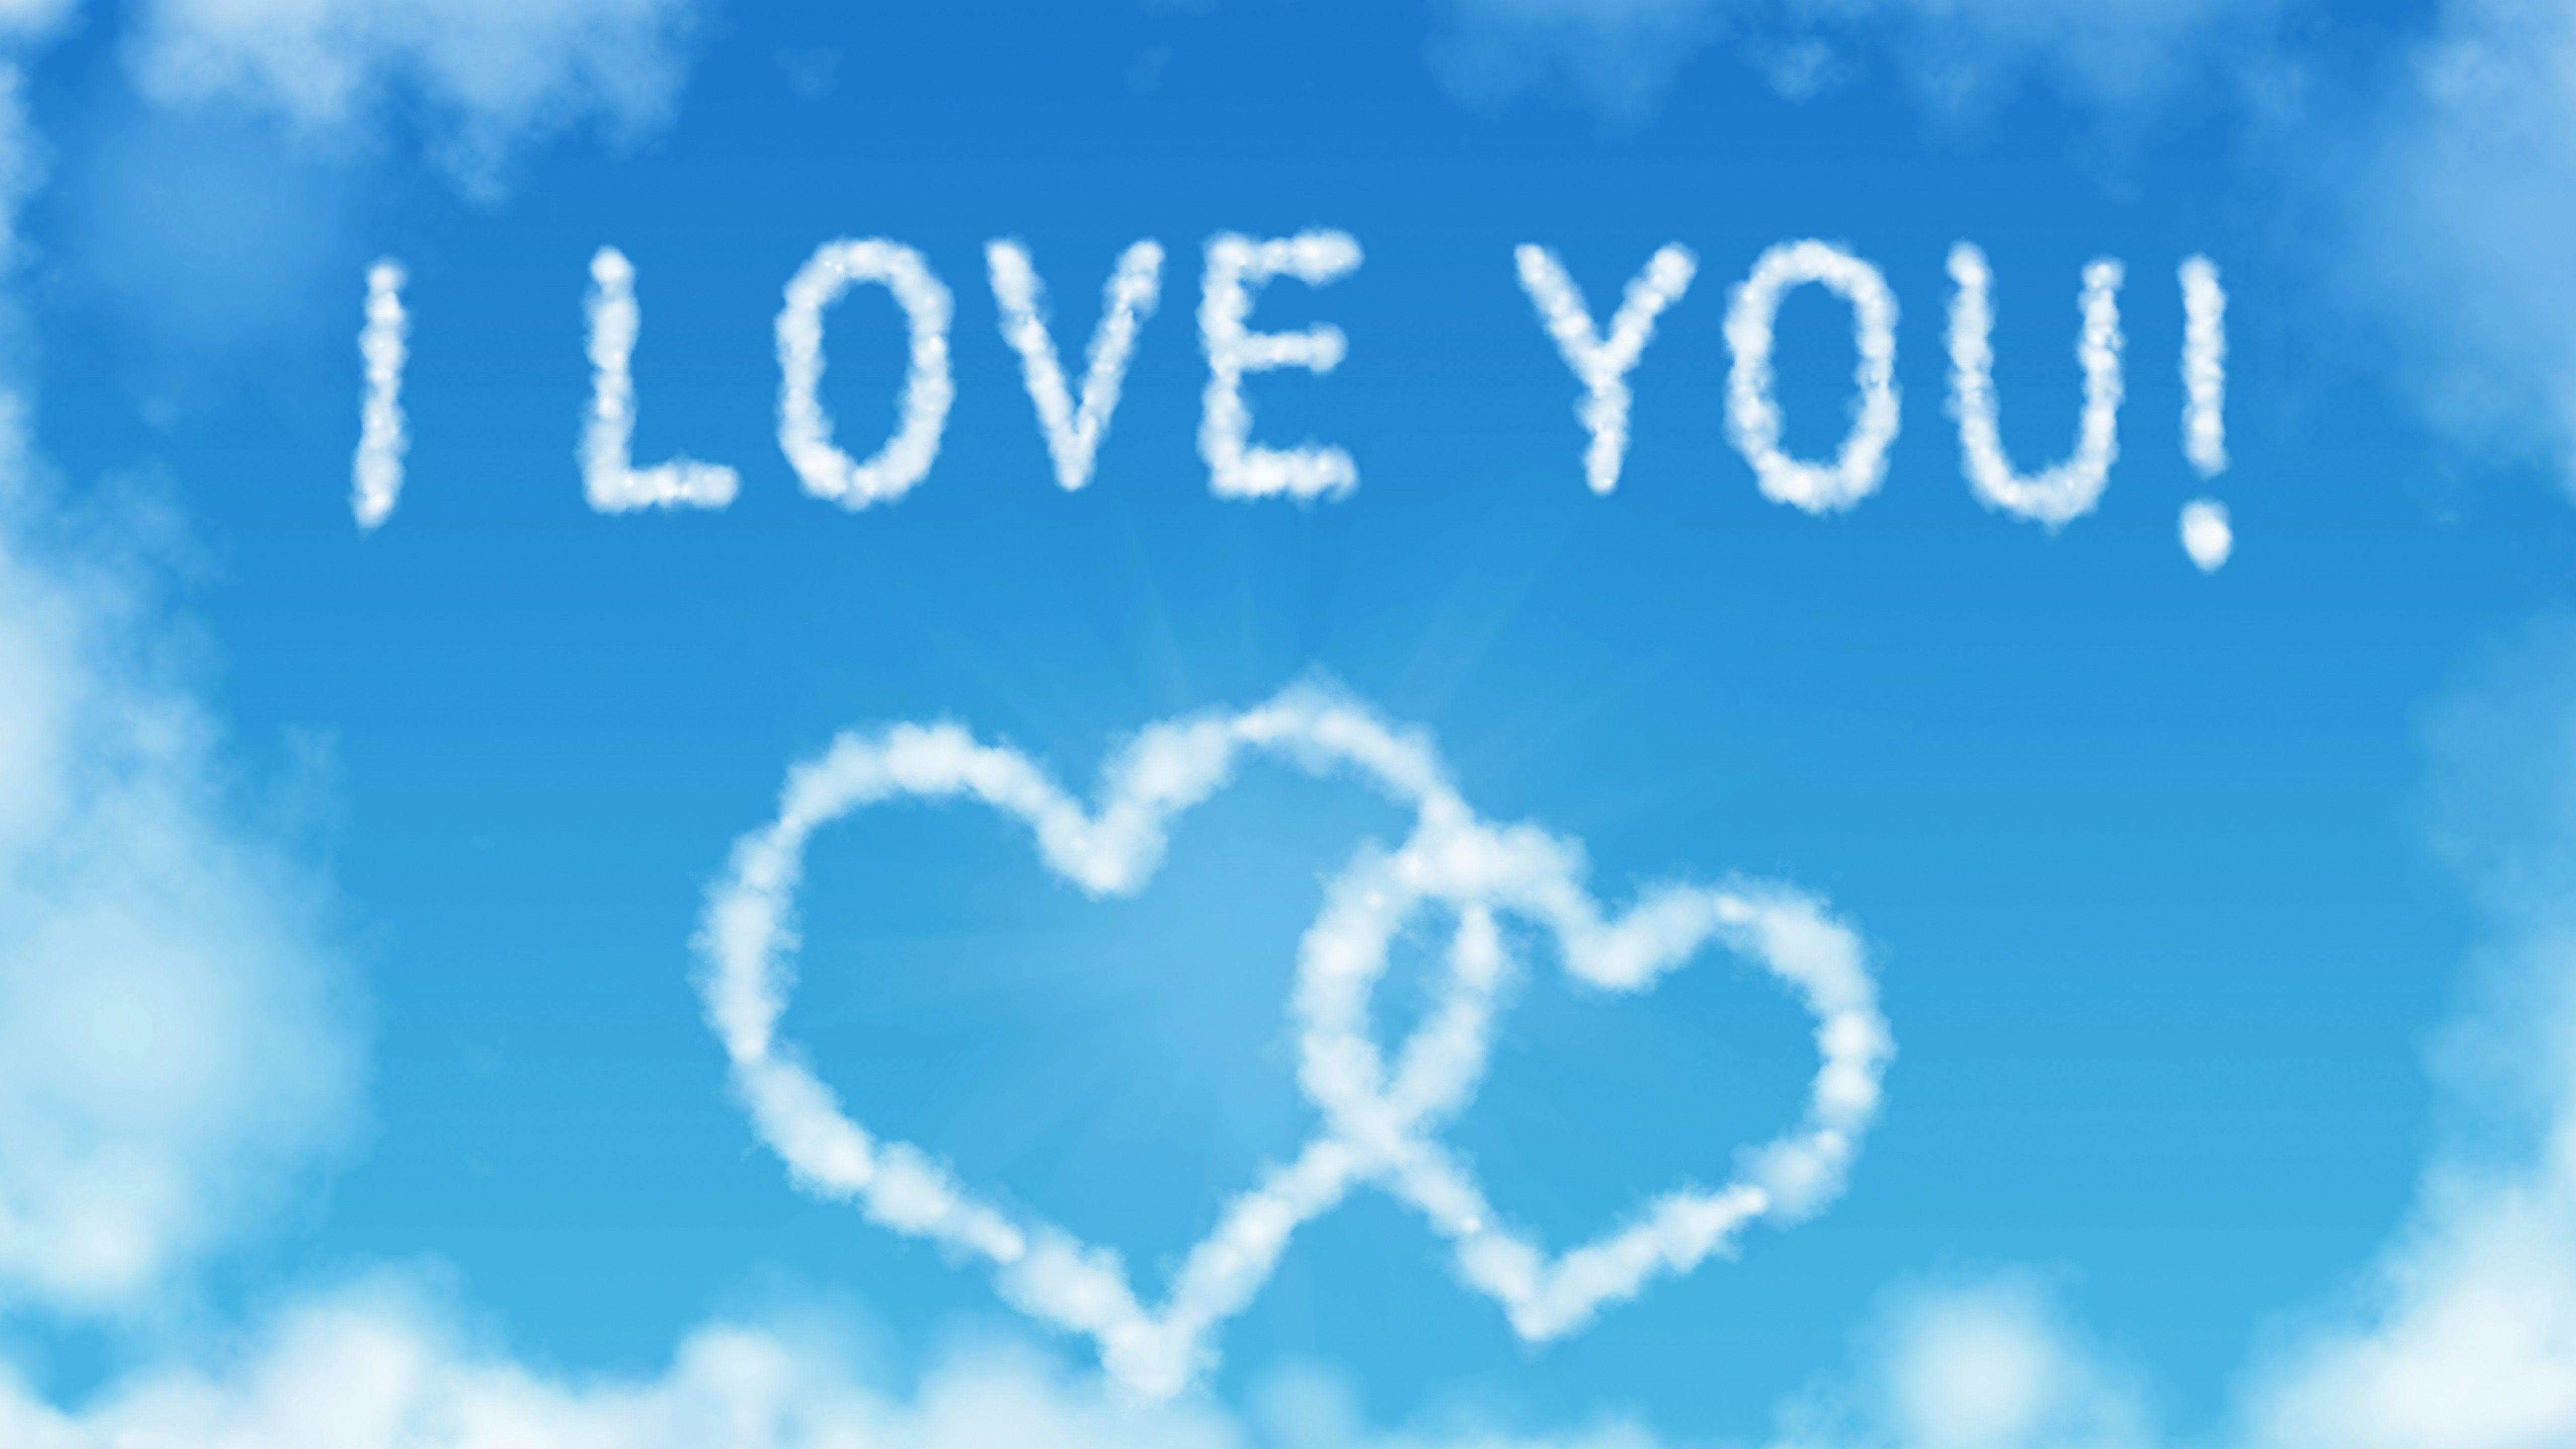 Wallpaper I Love You, Clouds, 4K, Love, Need You Wallpaper